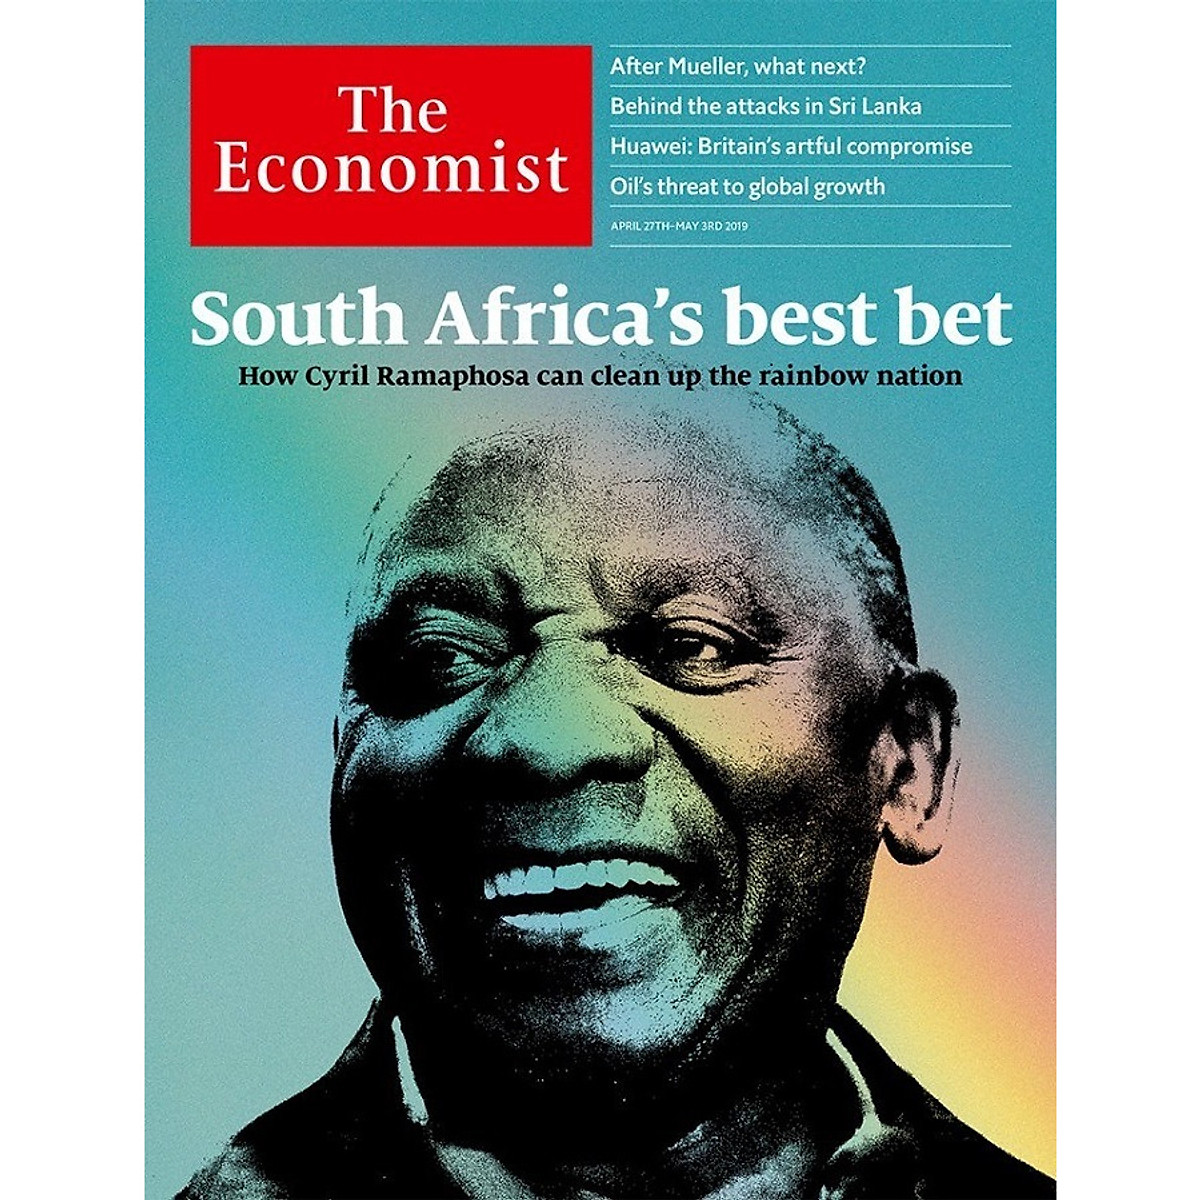 The Economist: South Africa's Best Bet - 17.19